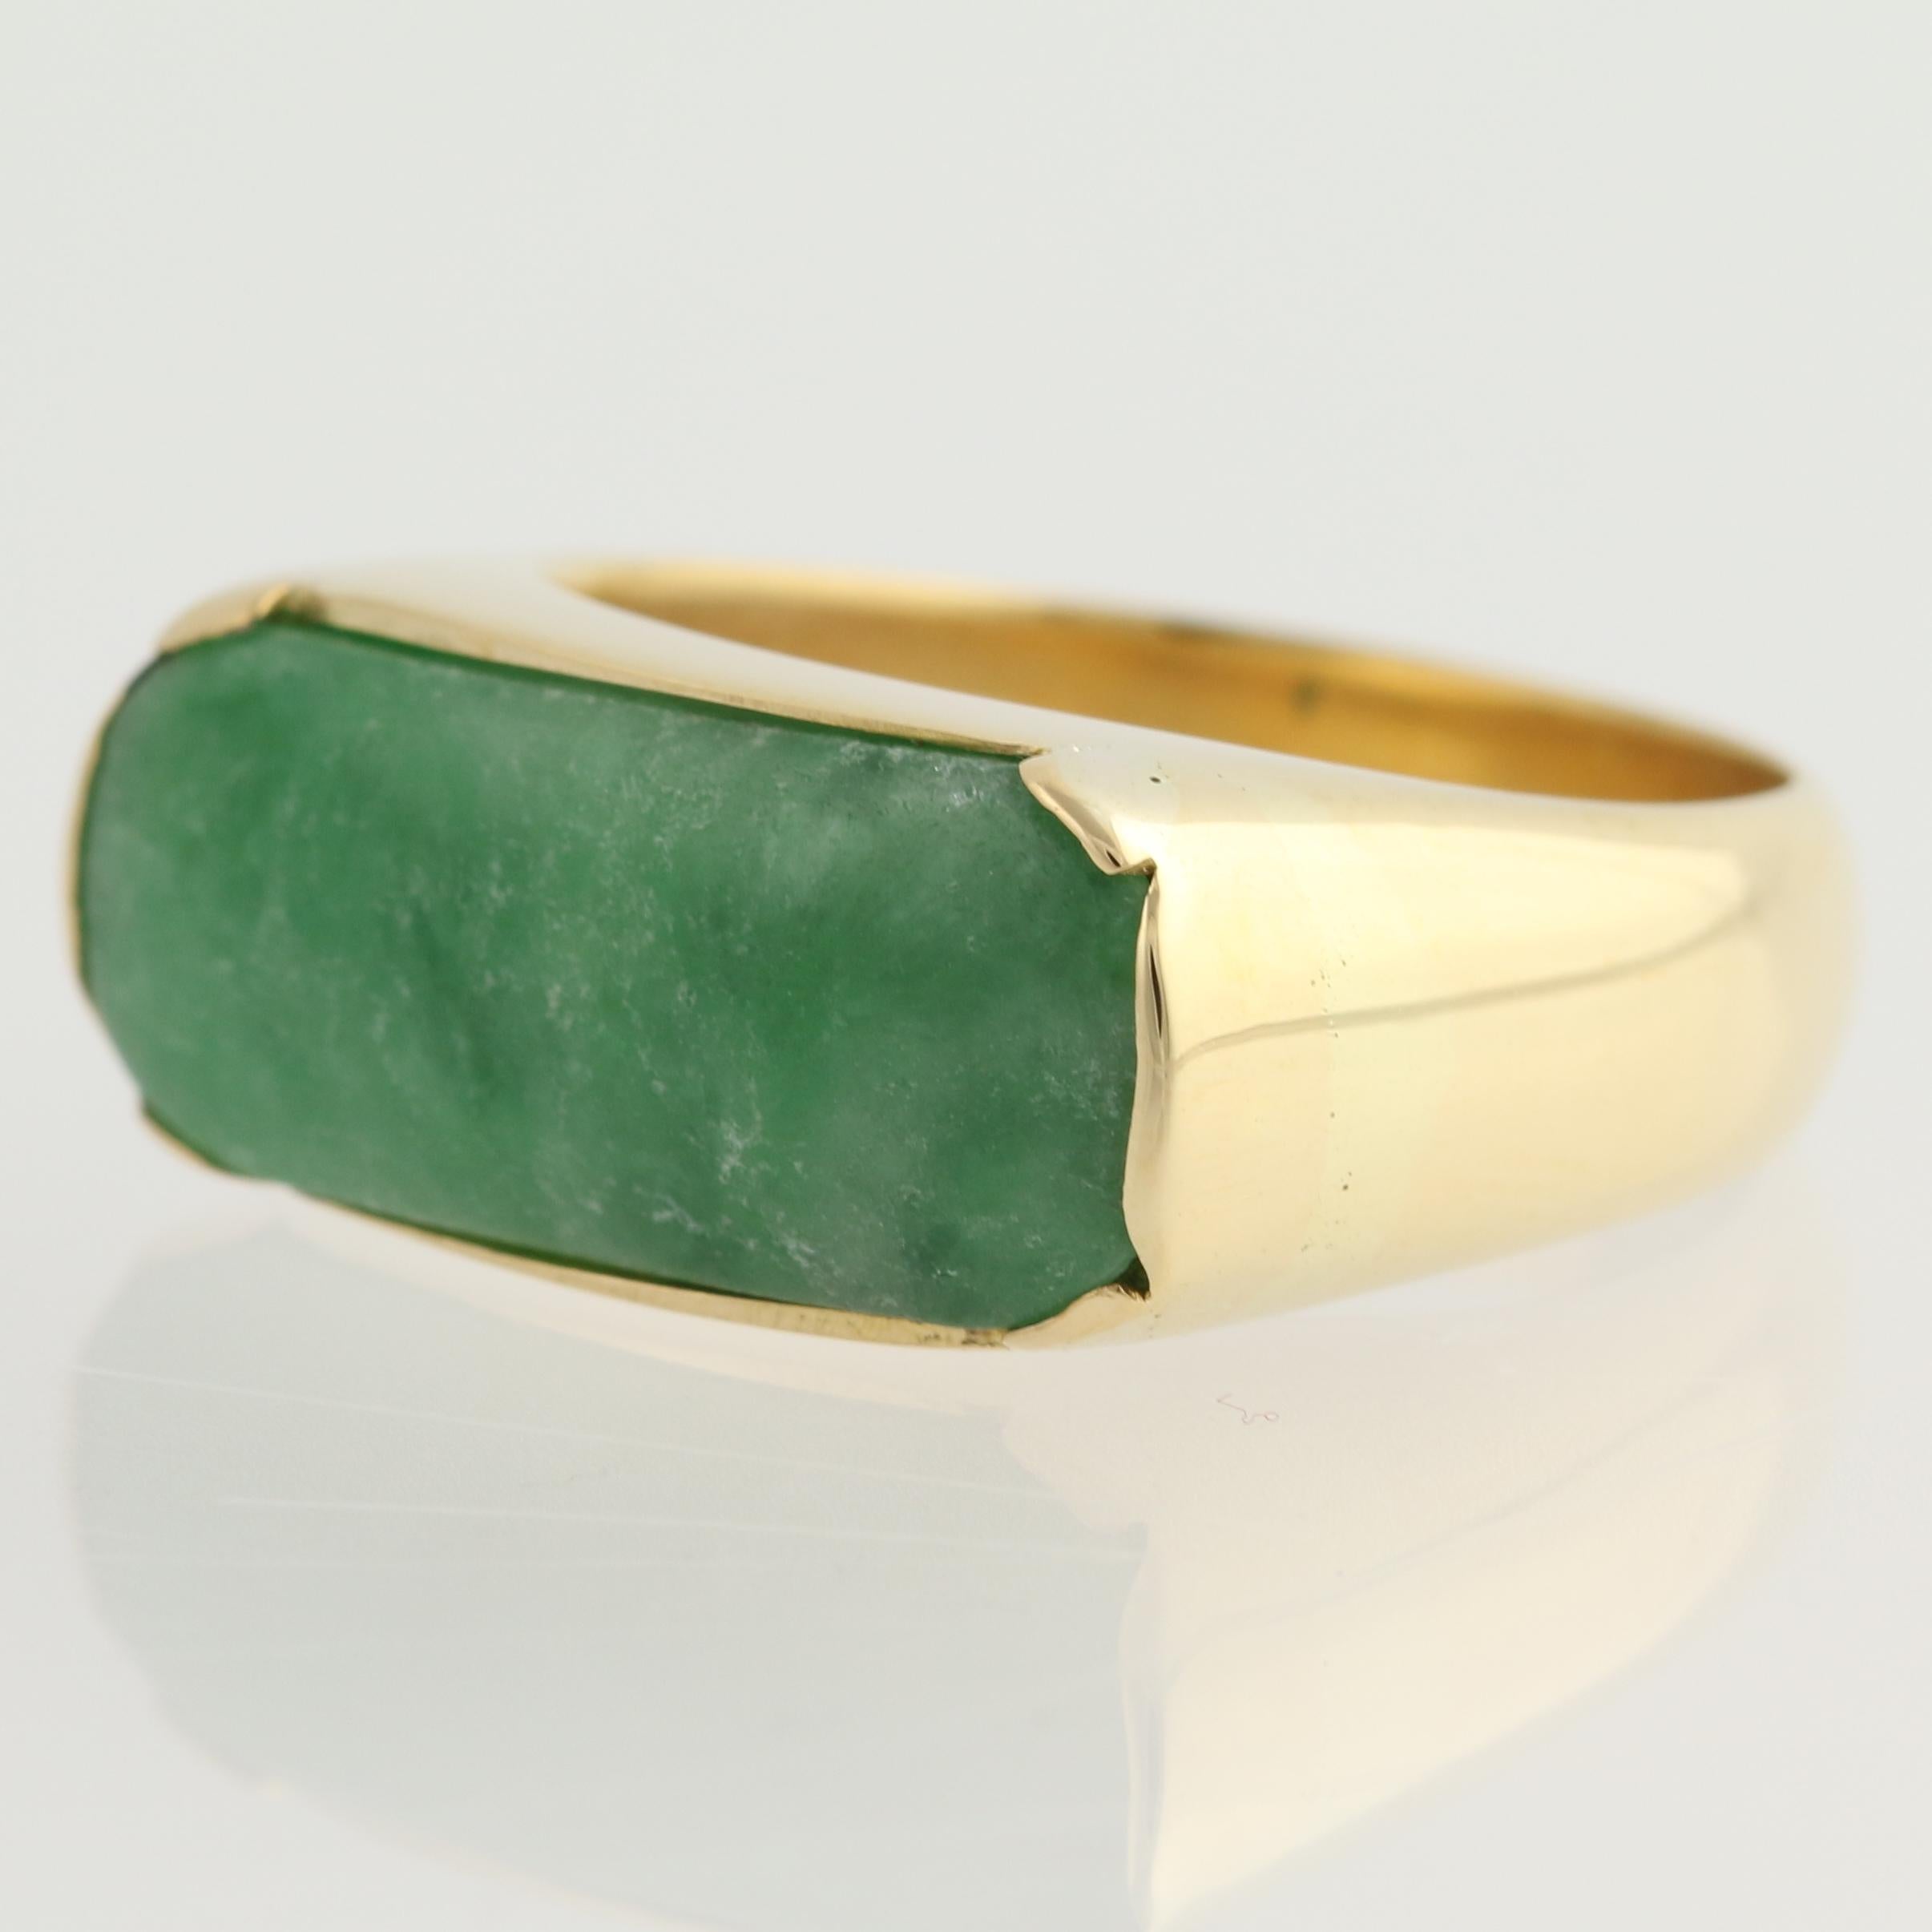 Give your ring collection an artsy look when you add this great looking men's ring! Mounted horizontally across the face of the ring in a bezel of gleaming gold, the jadeite is spring-green with swirls of a darker emerald-green. Please note that the